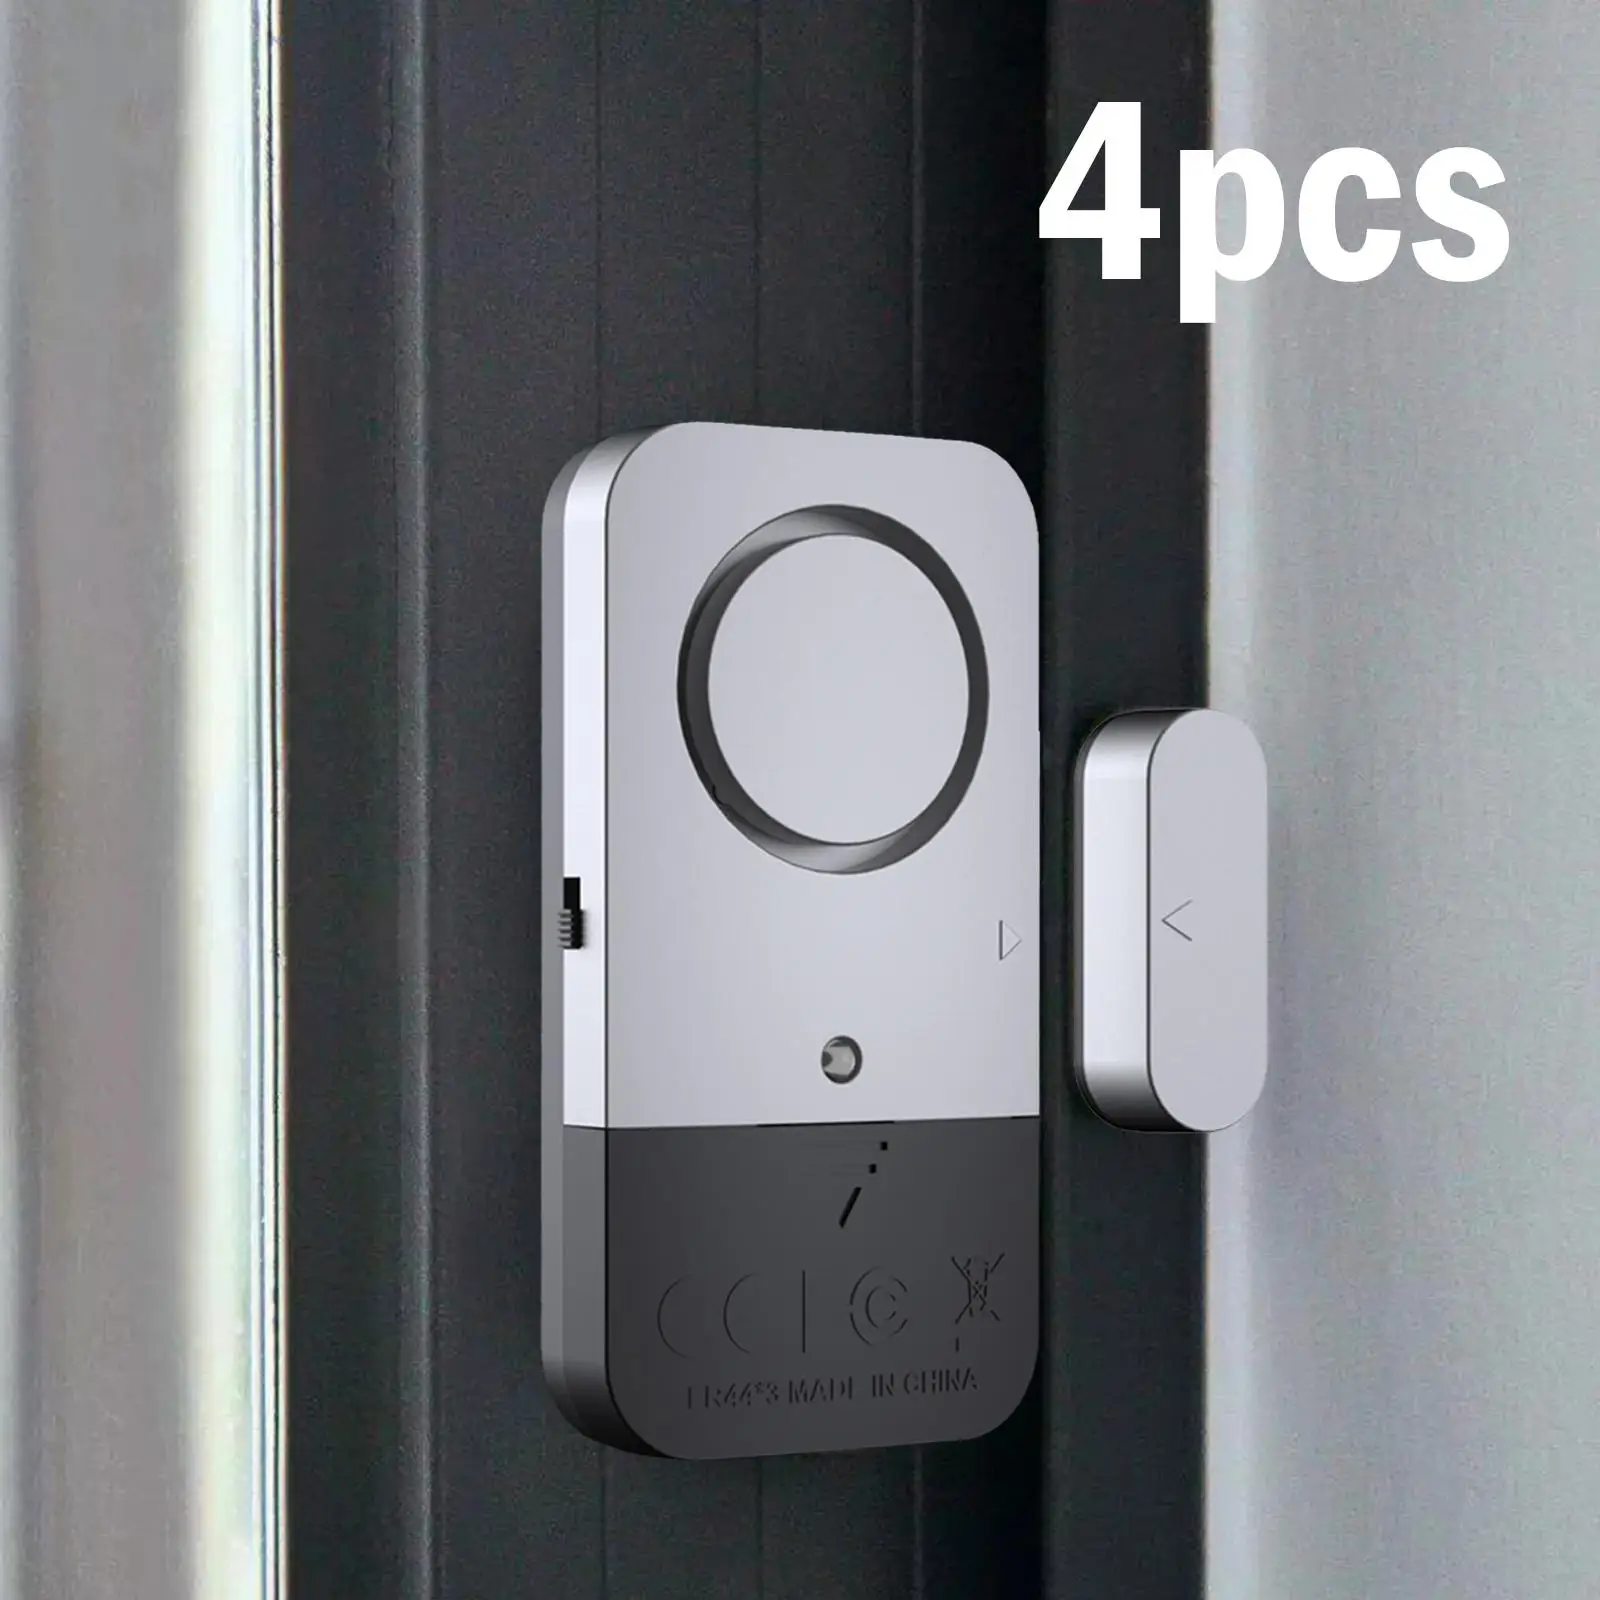 4Pcs Door Window Alarm 120dB Loud Easy to Install Magnetic Sensor Home Security Alarm for Office Home Business Dorm Kids Safety